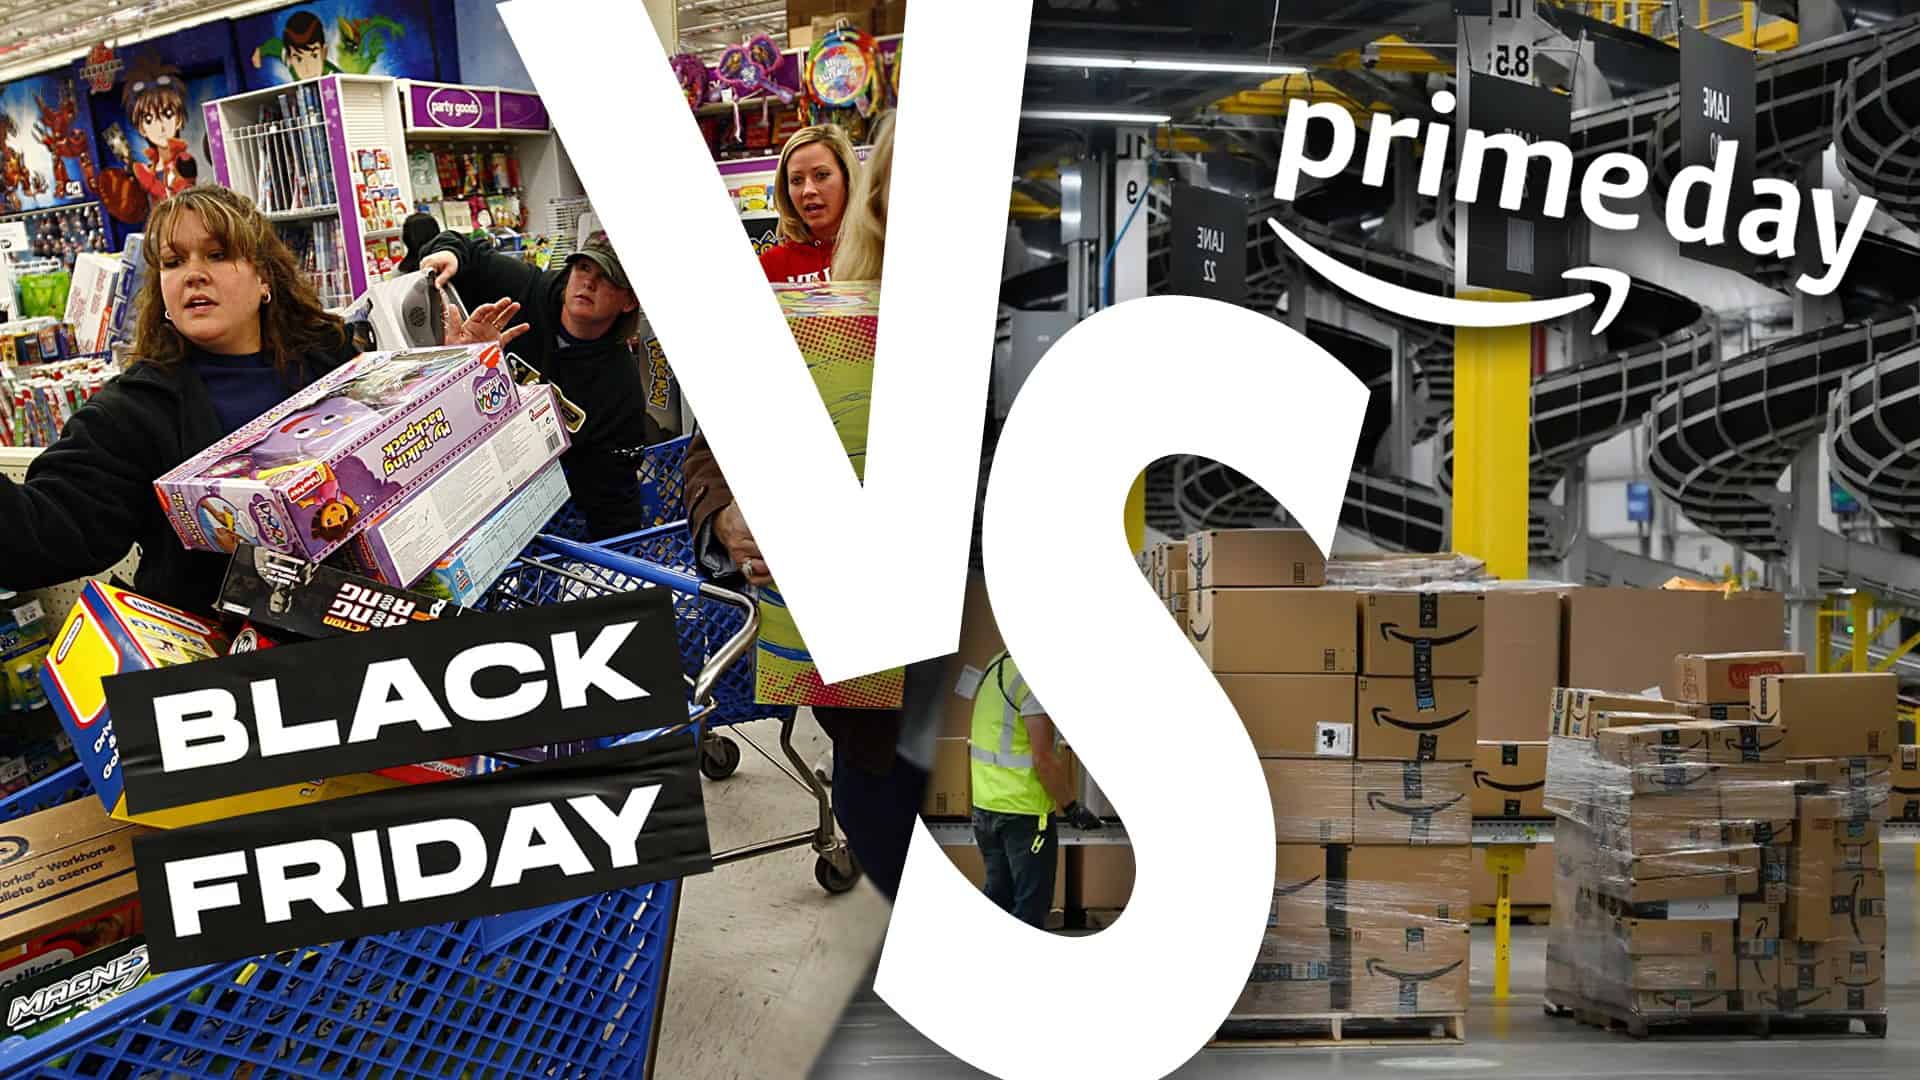 Amazon Prime Day or Black Friday When Can You Get The Best Deals? WePC